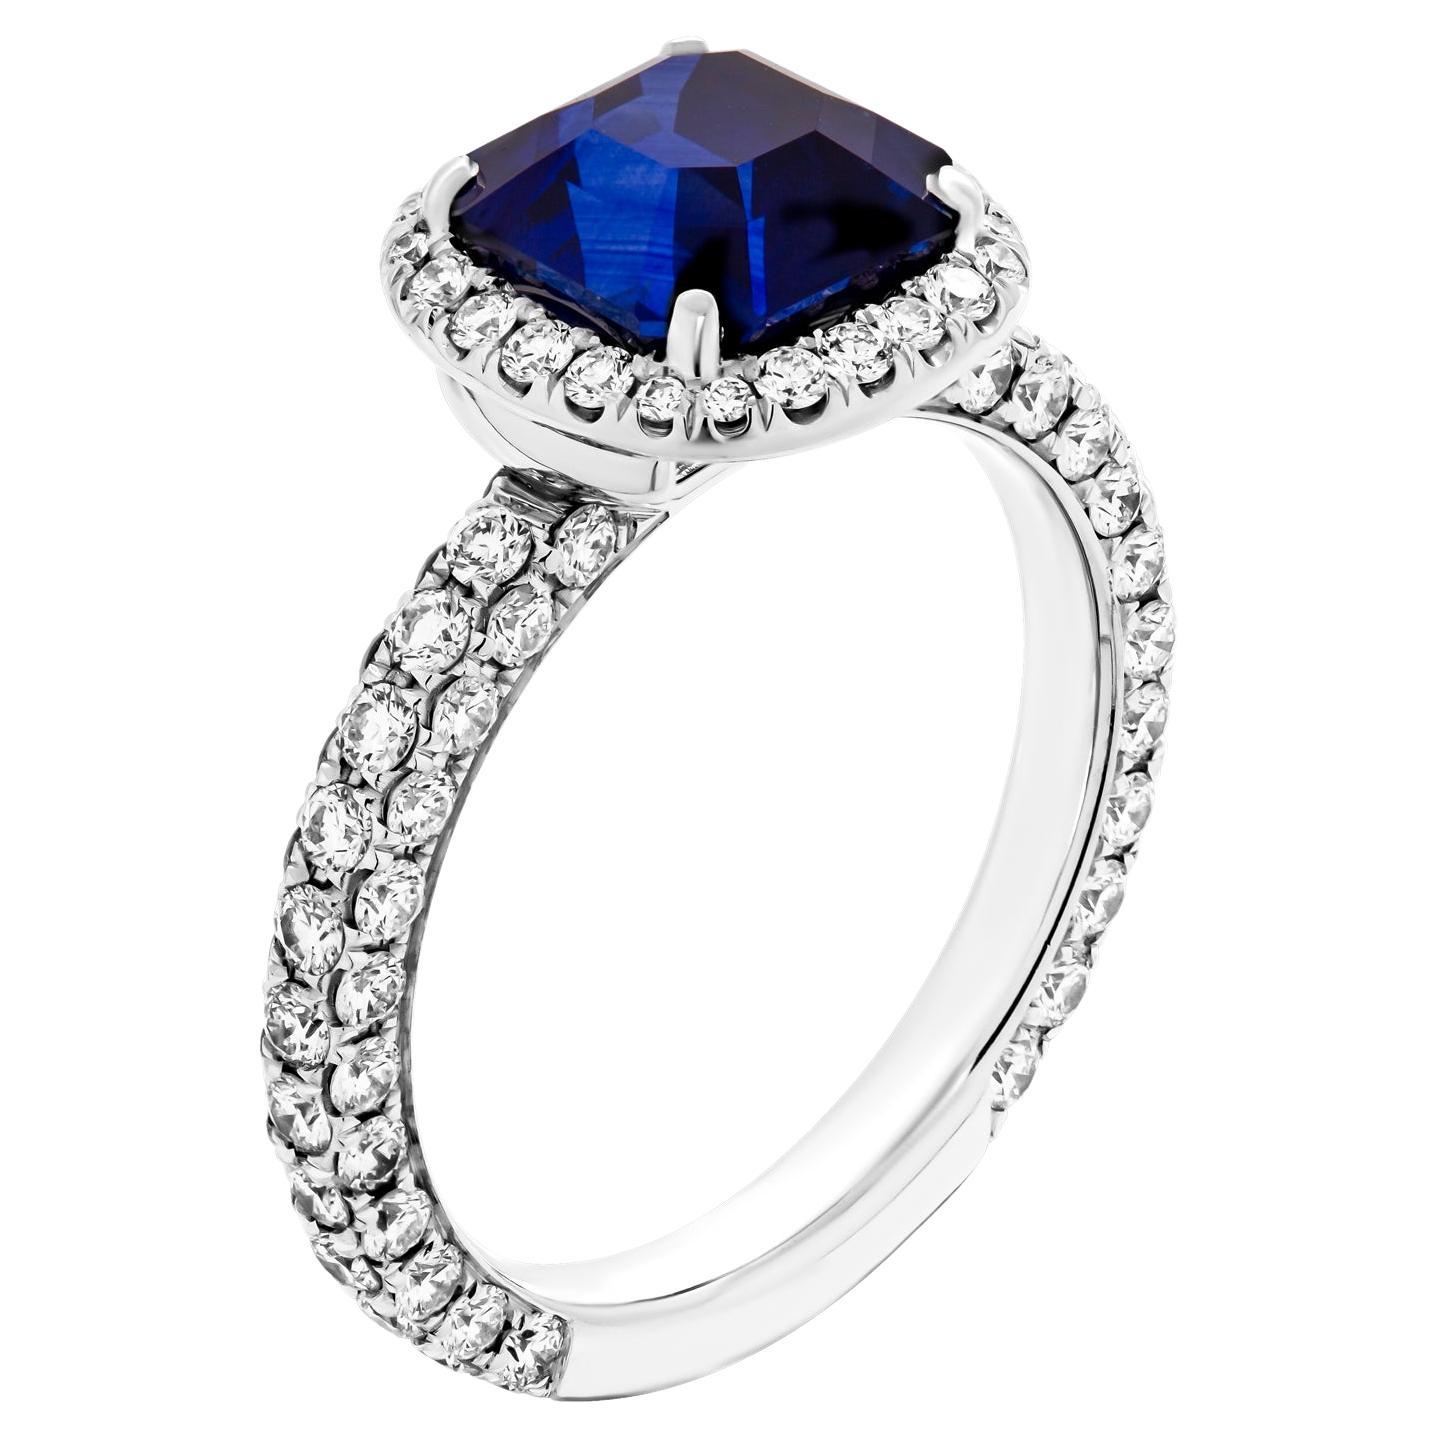 Platinum Ring with 3.08 Carat Cushion Cut Sapphire For Sale